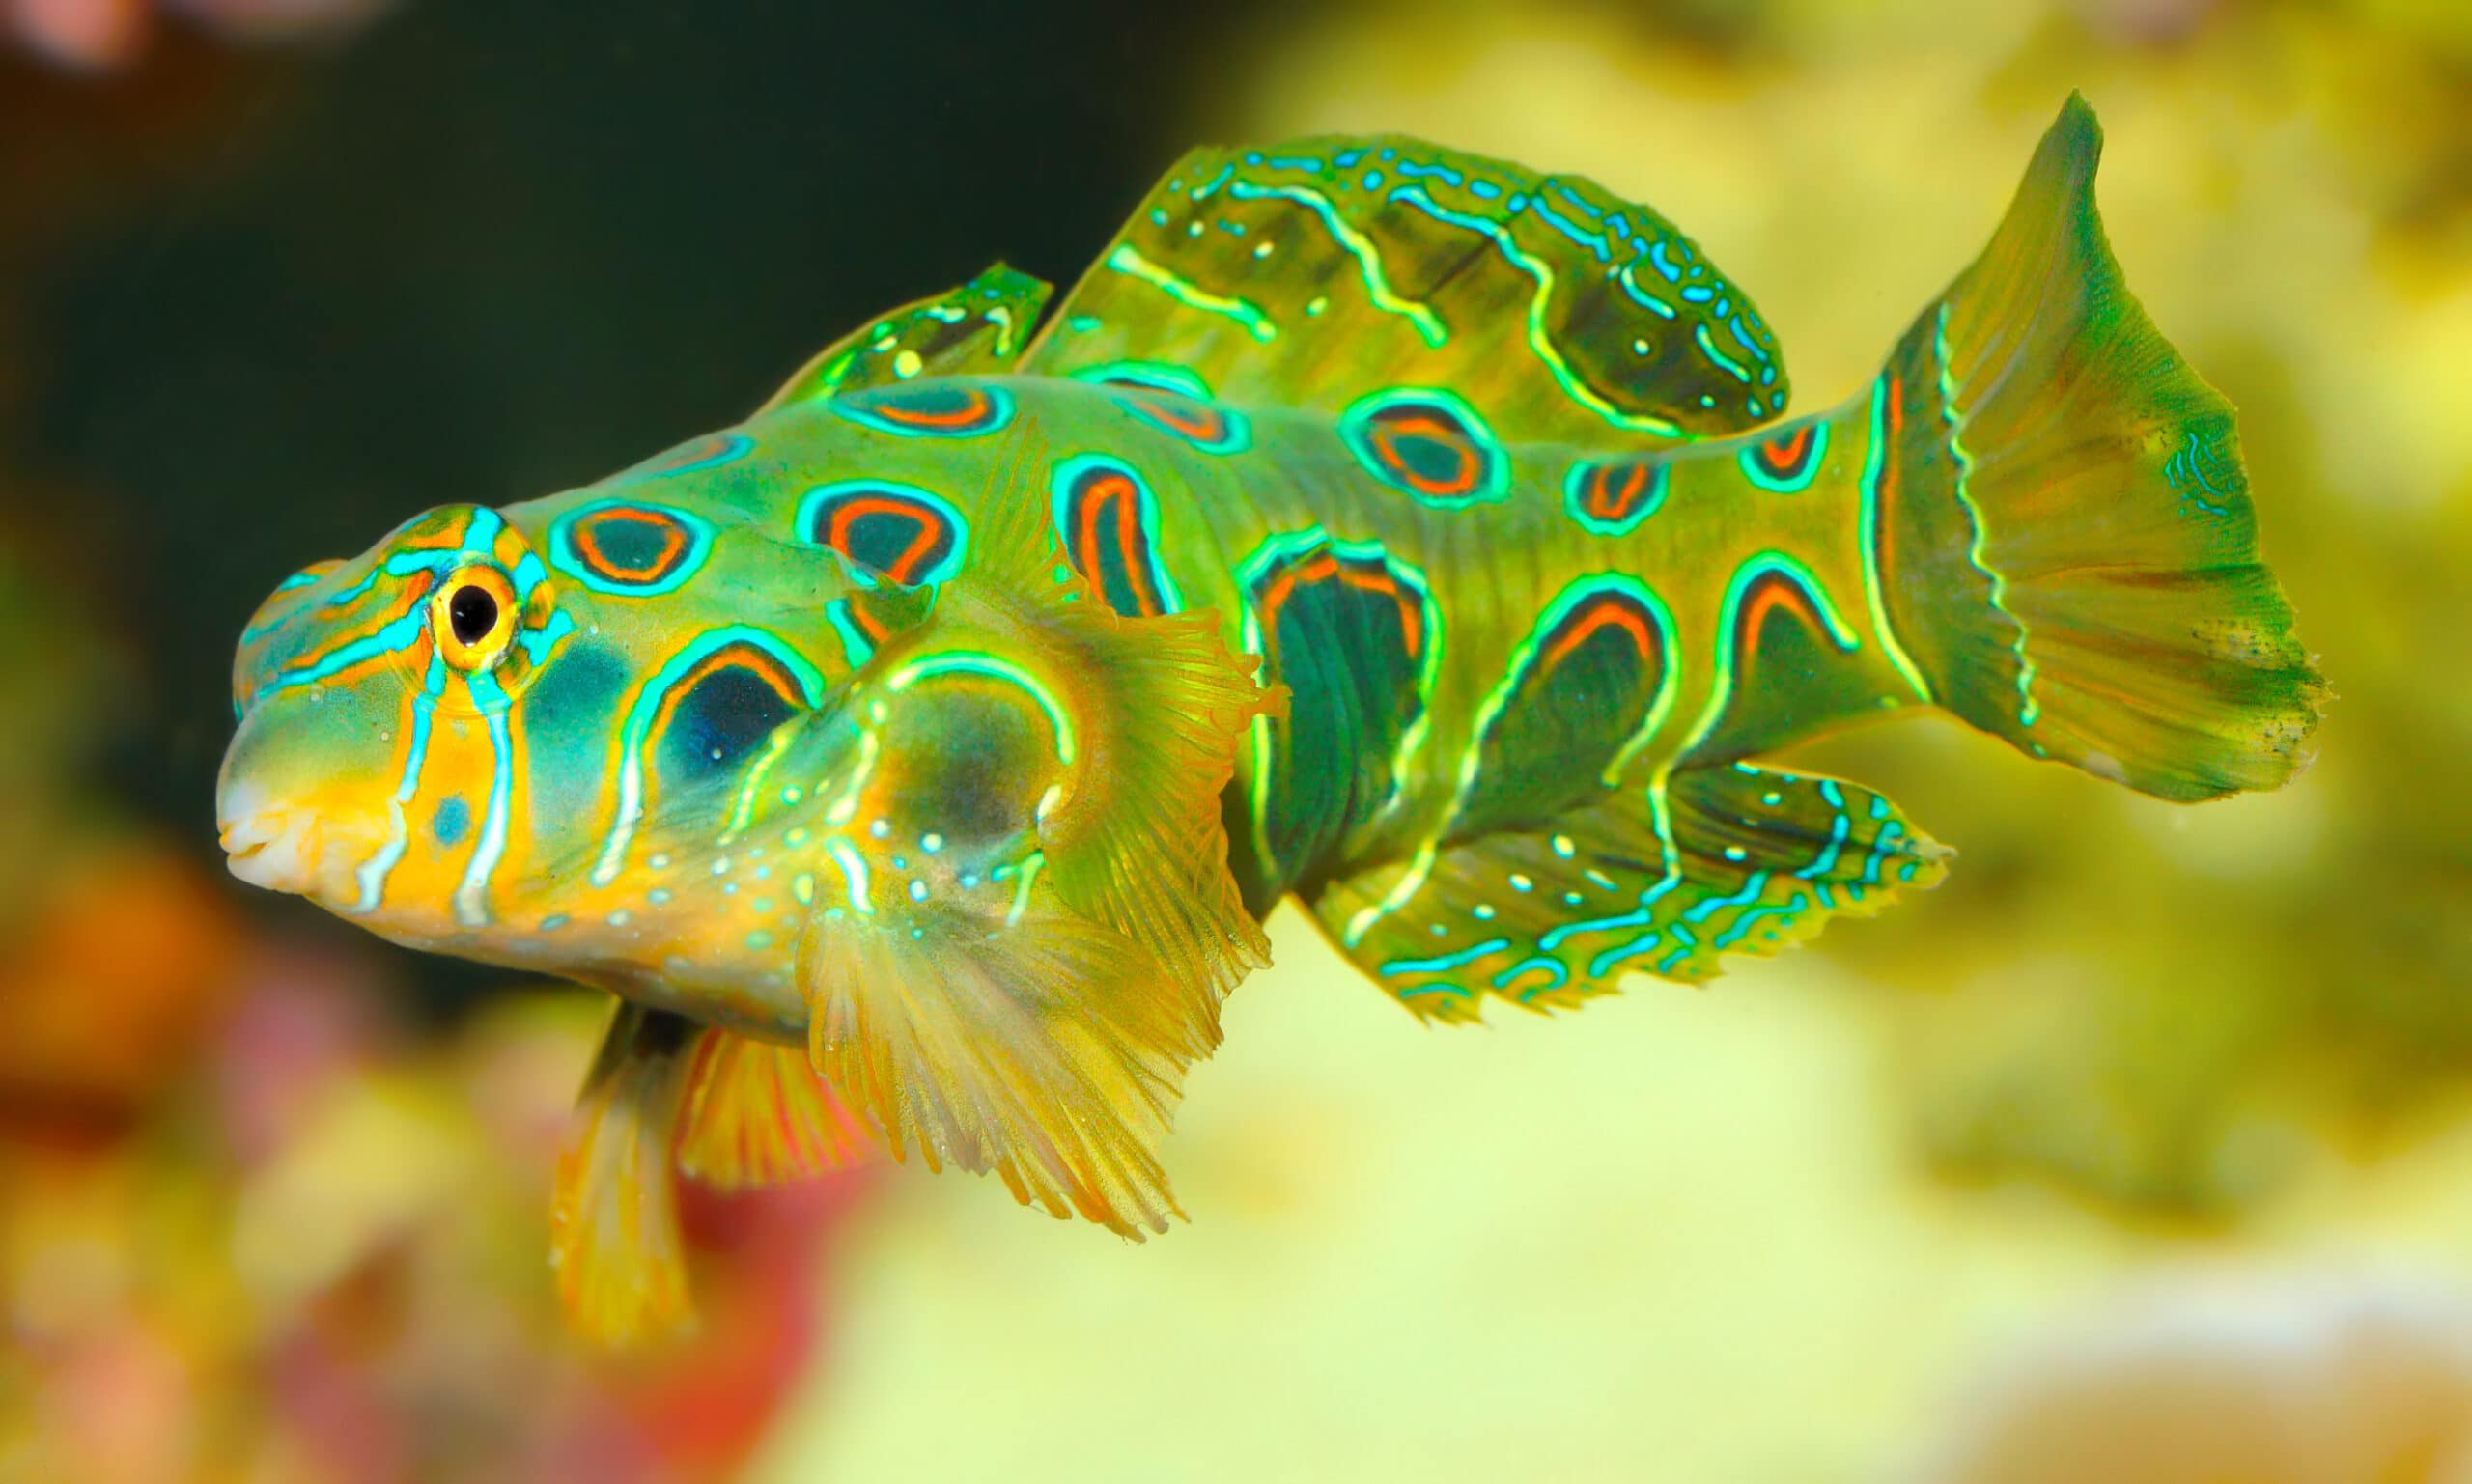 An image illustration of Most Beautiful Fish